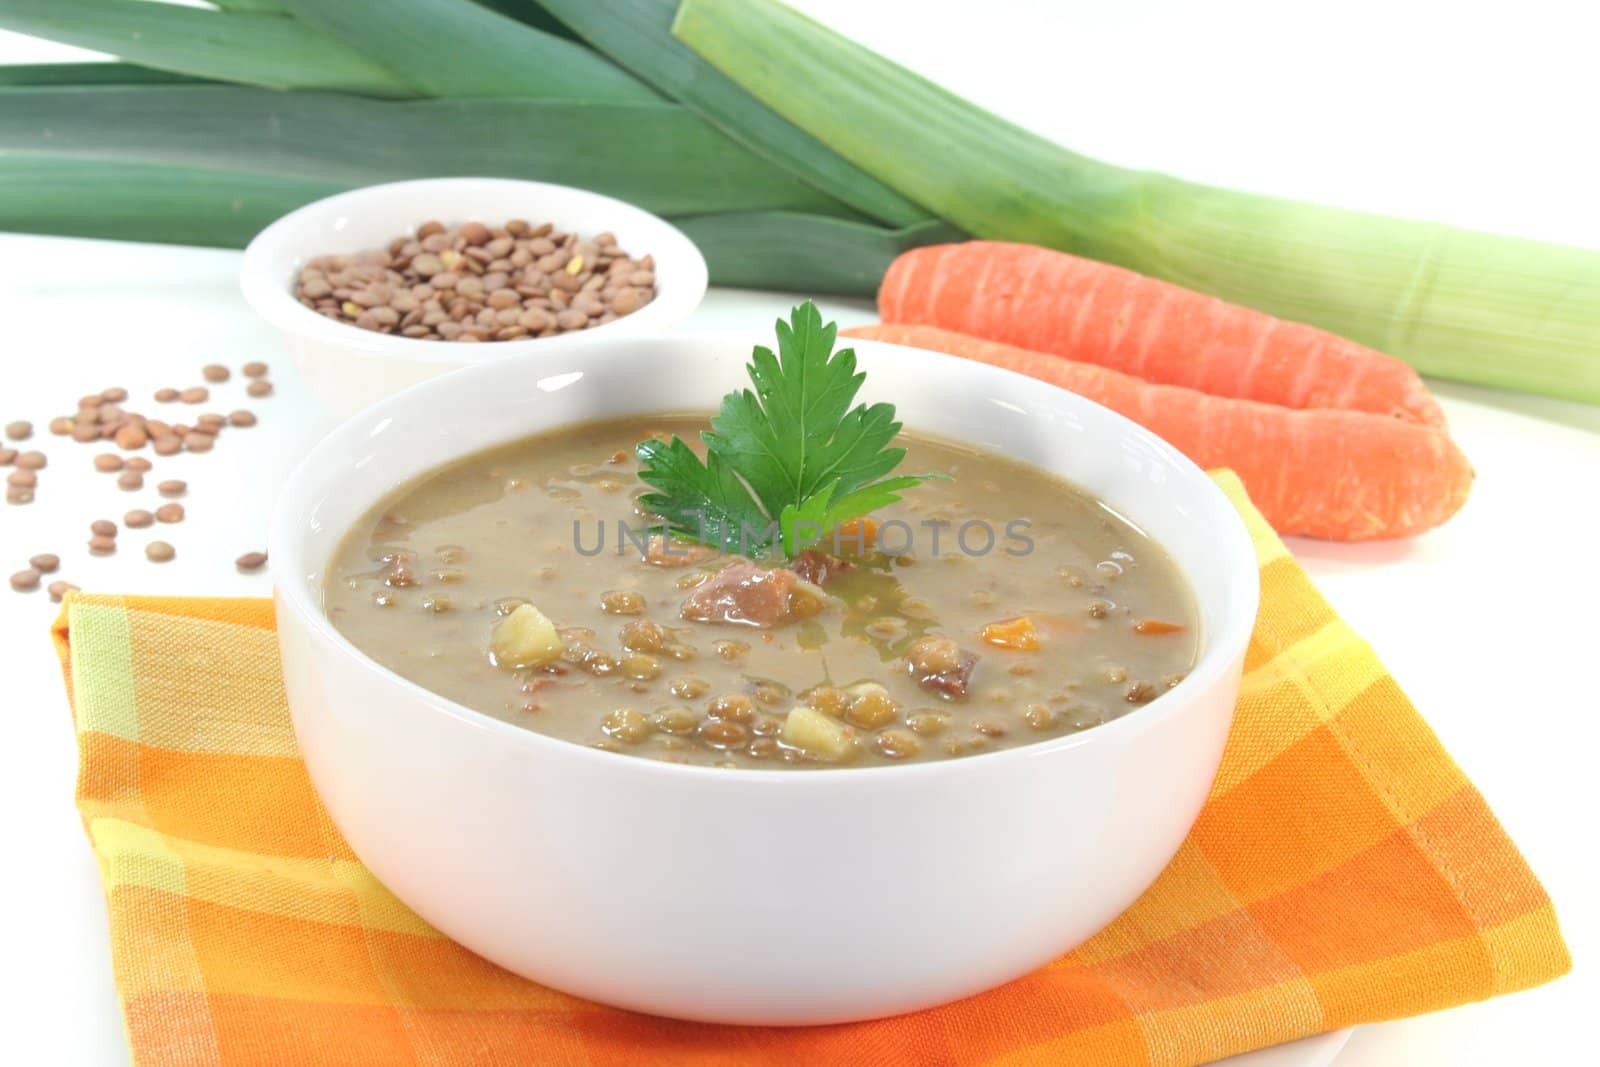 Lentil soup with potatoes, bacon and fresh parsley